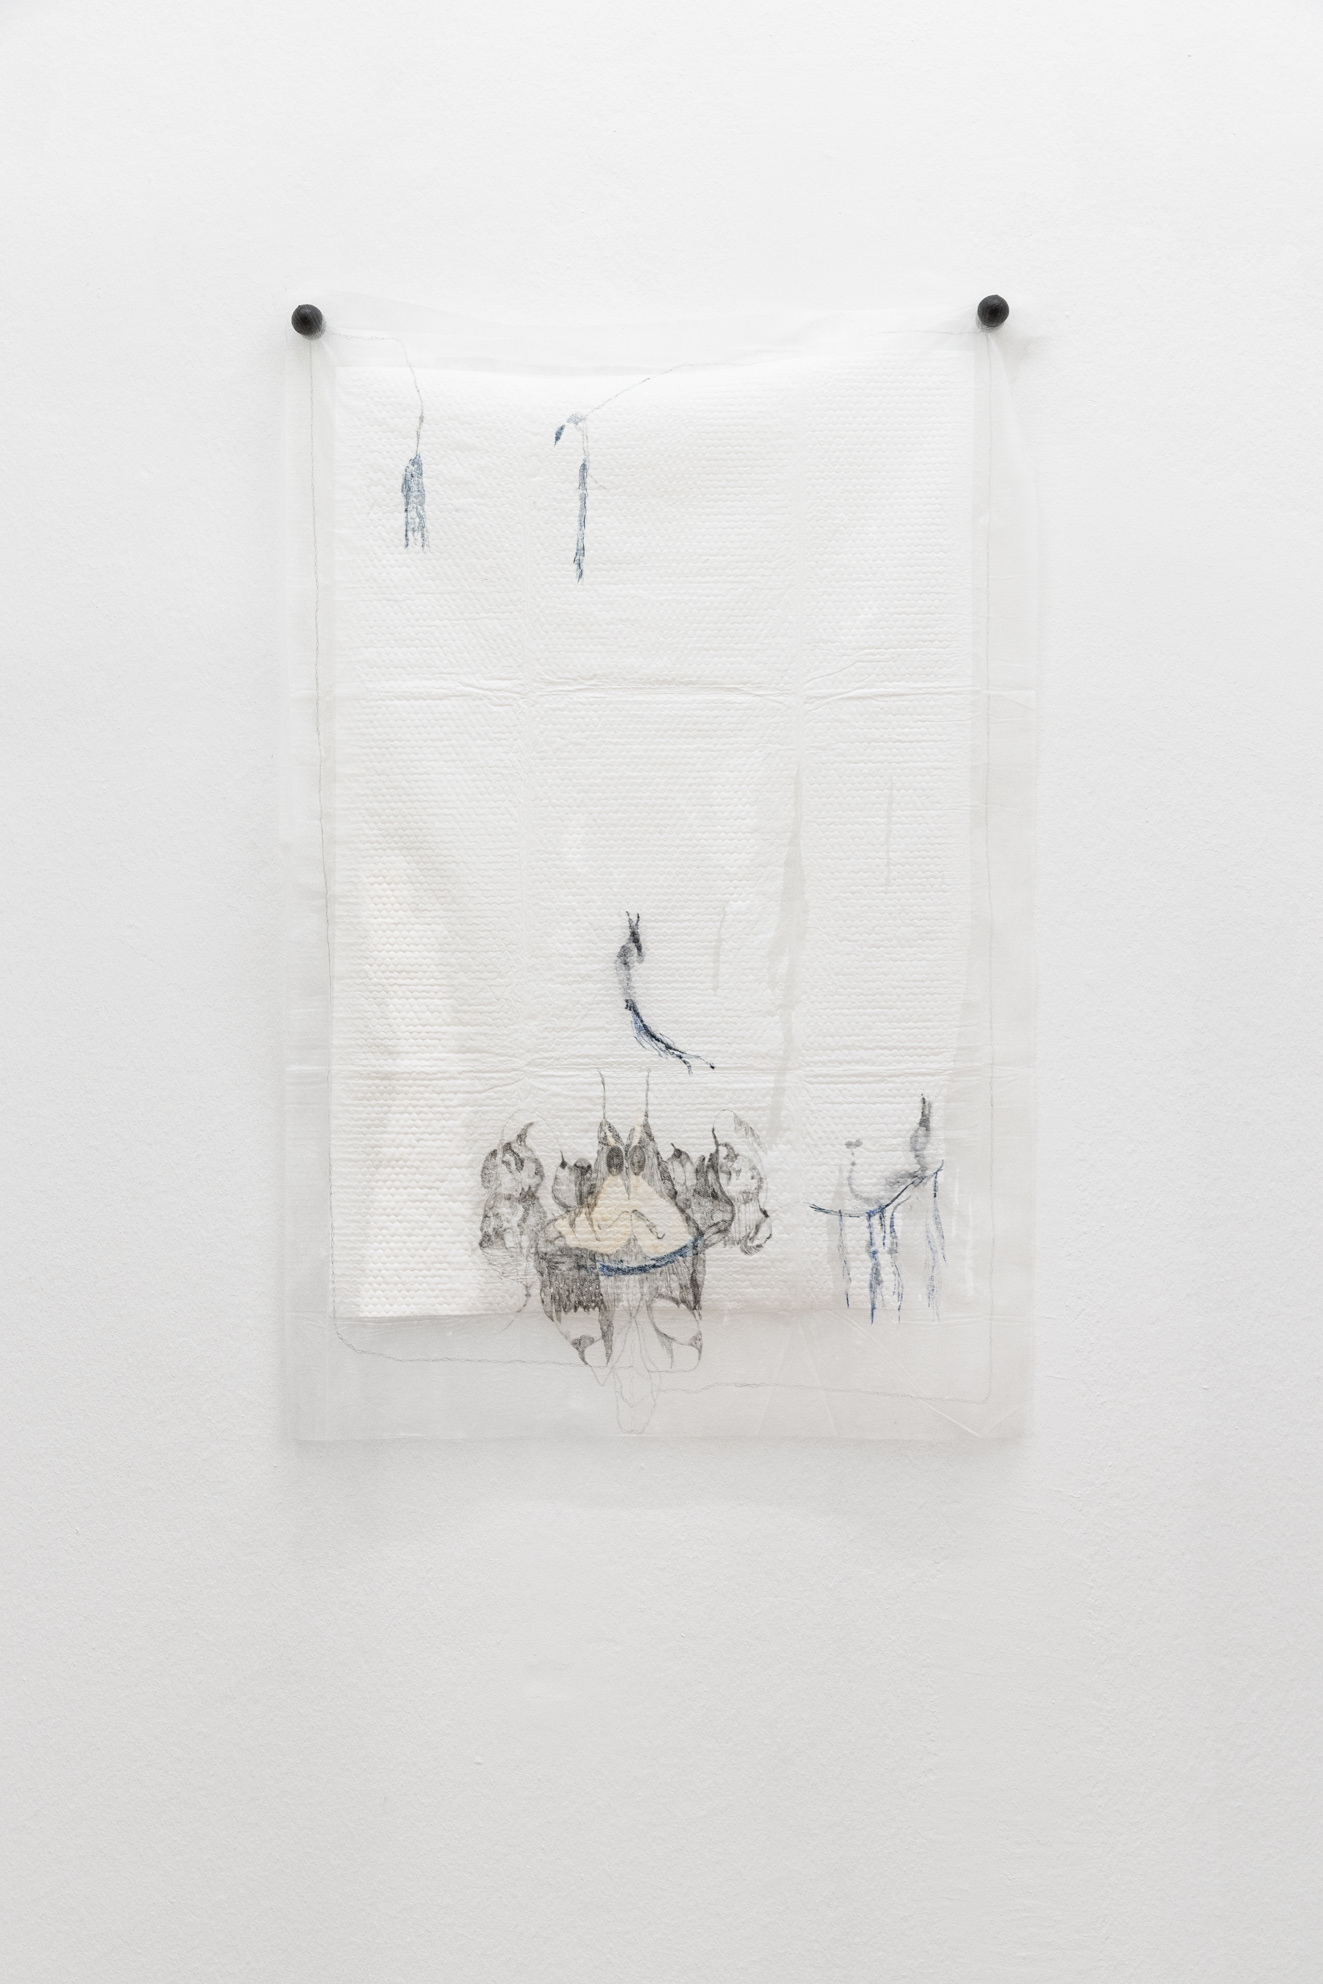 Laura Ní Fhlaibhín, "a wet warm afterlife by the blue willow pleasure pool with leopard slugs and the egg guardian and vaginal pearl cascades and bends", 2023, mixed media on incontinence pad, 60 x 90 cm